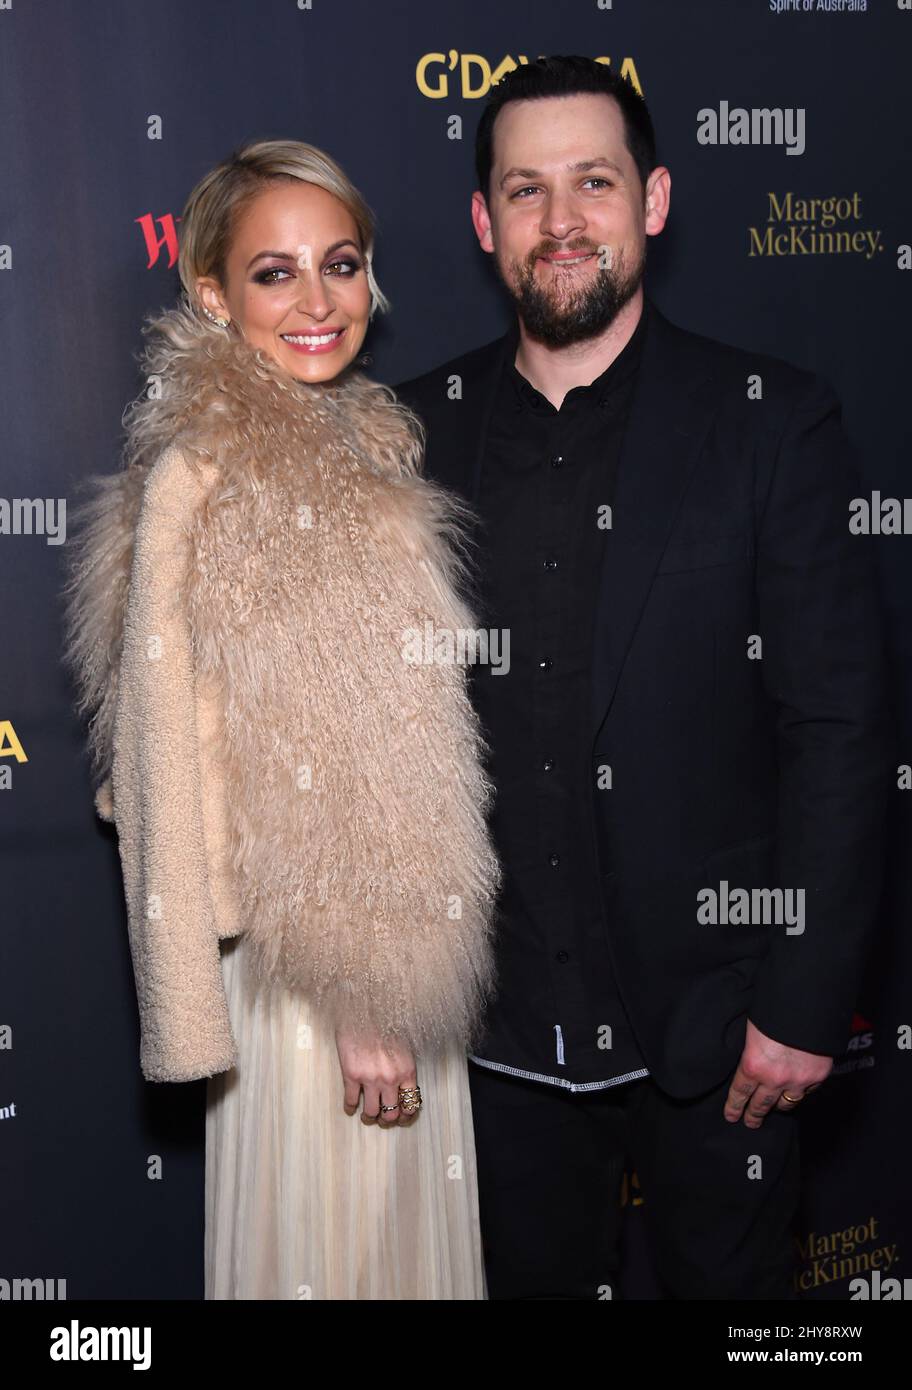 Nicole Richie & Joel Madden attending the 2016 G'Day USA Los Angeles Gala Stock Photo